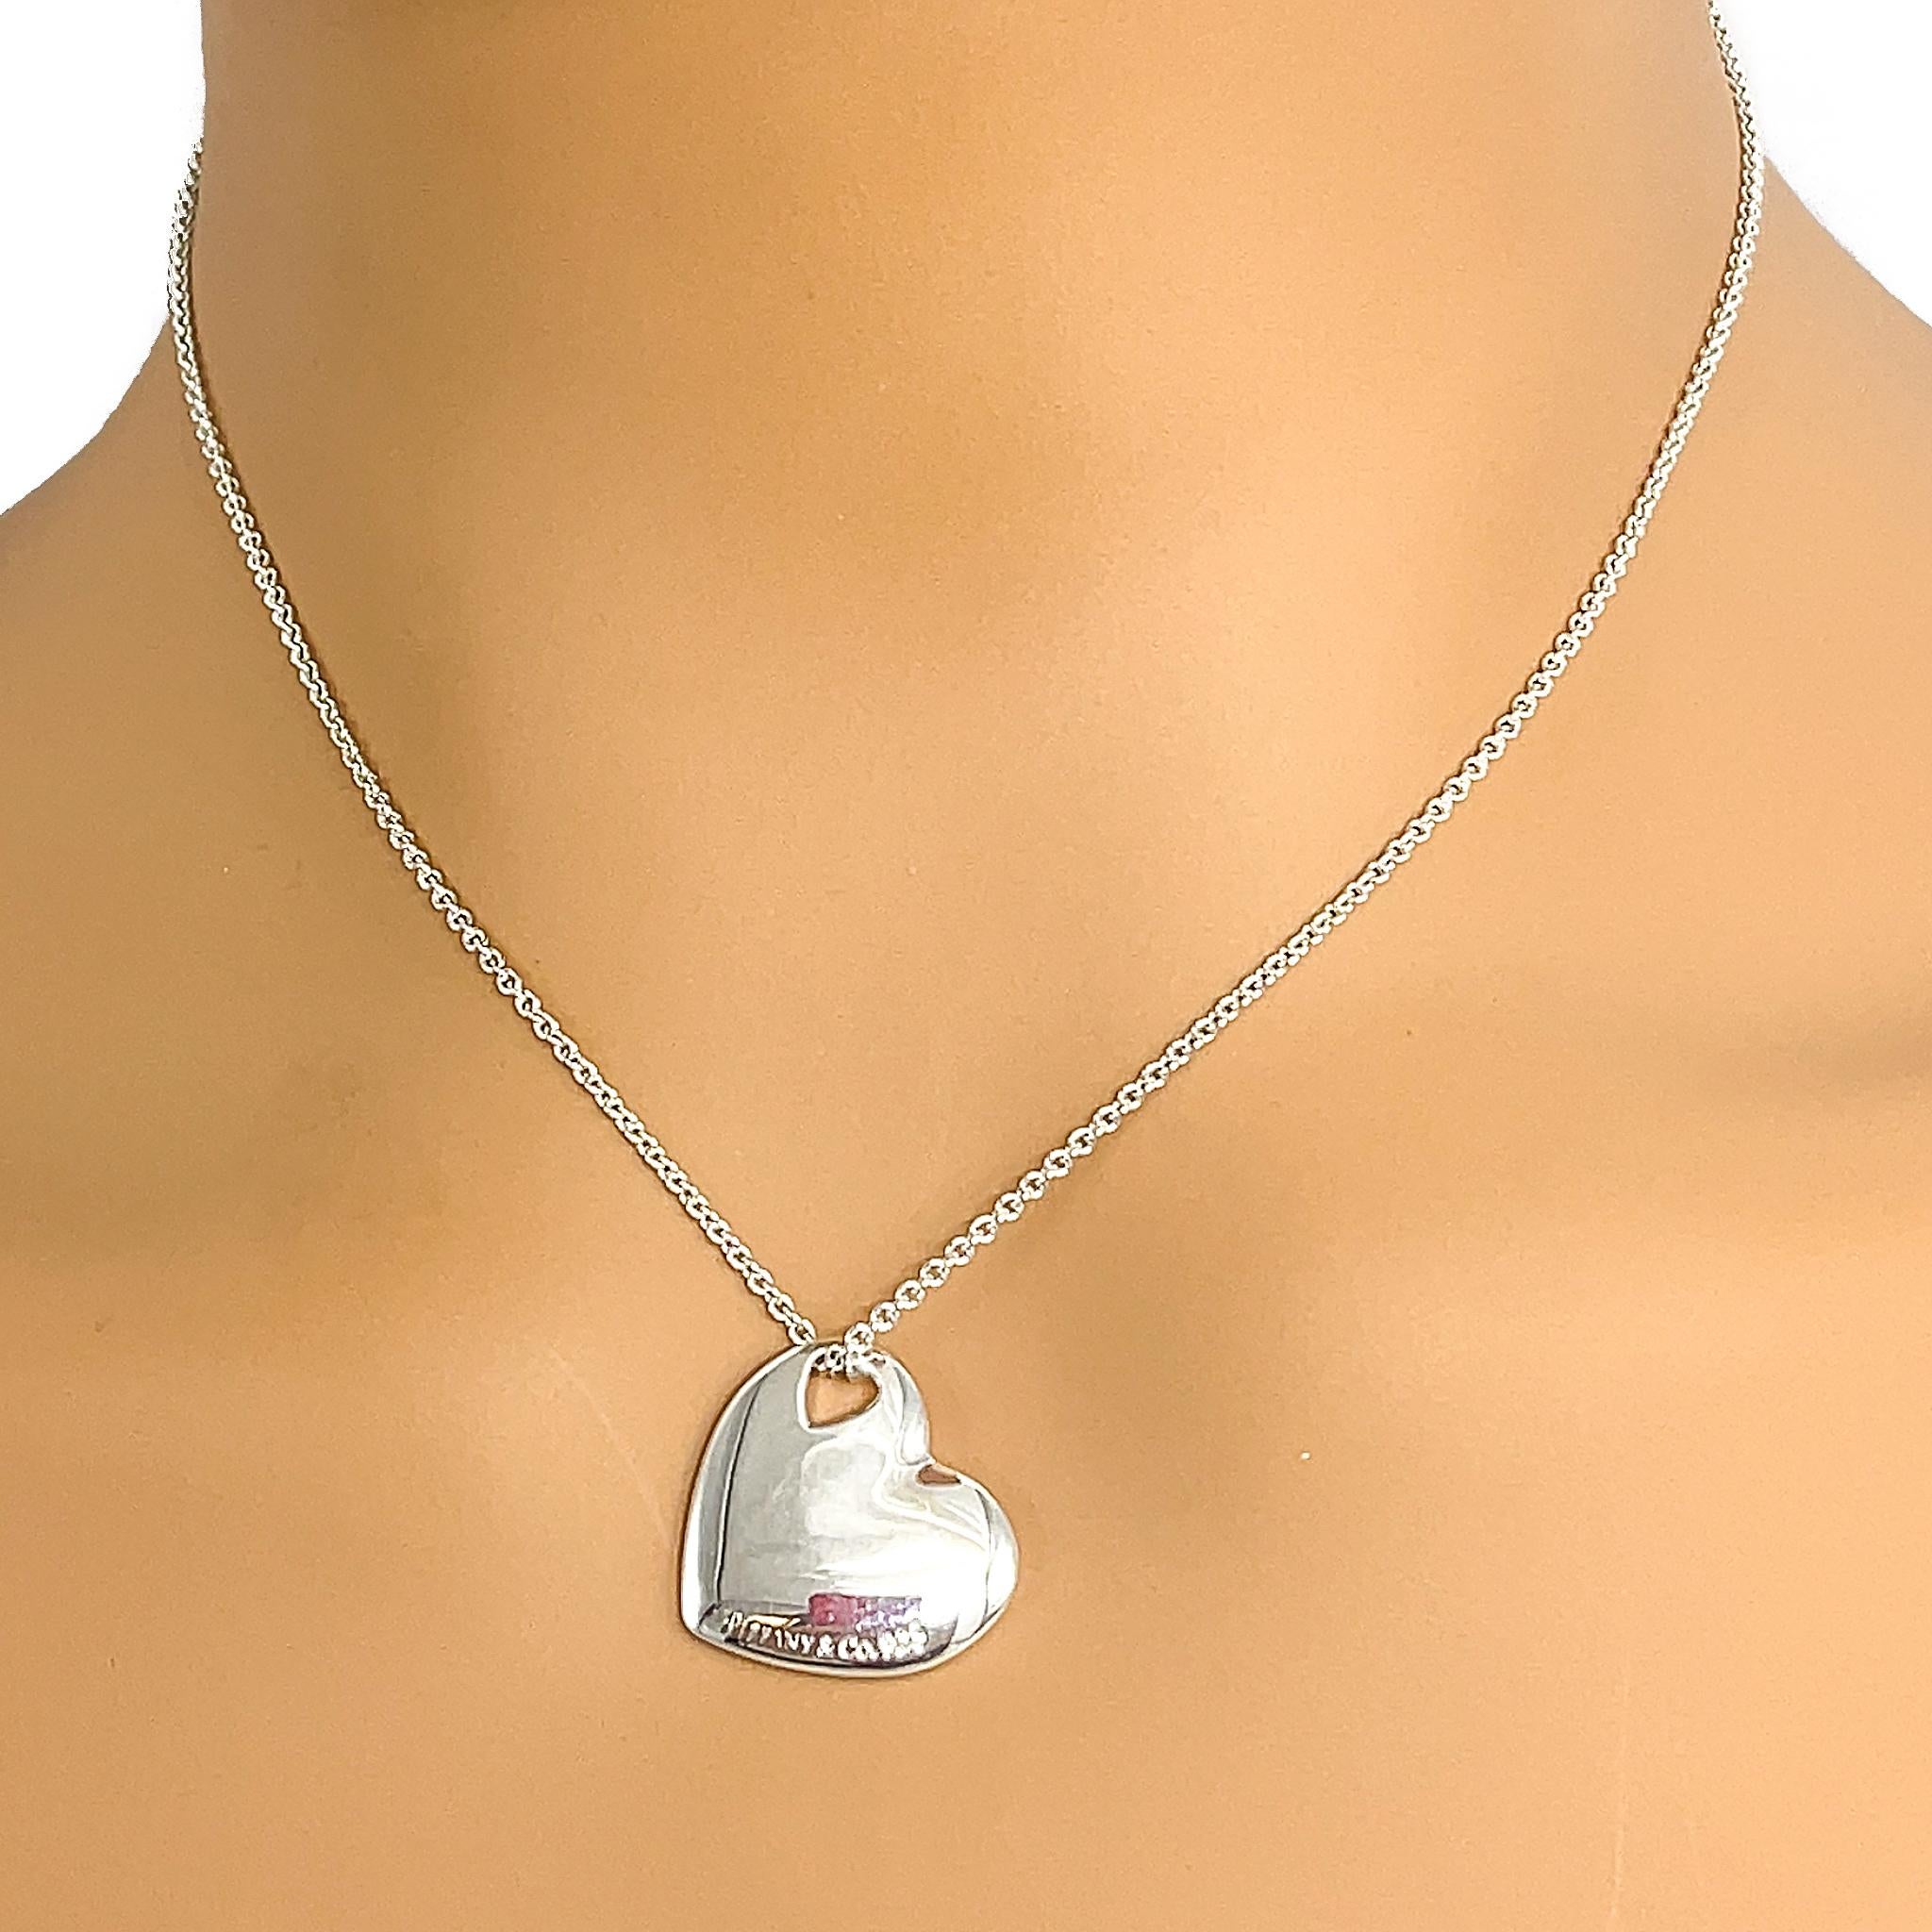 Tiffany and Co. Sterling Silver Cutout Heart Pendant Necklace For Sale 5